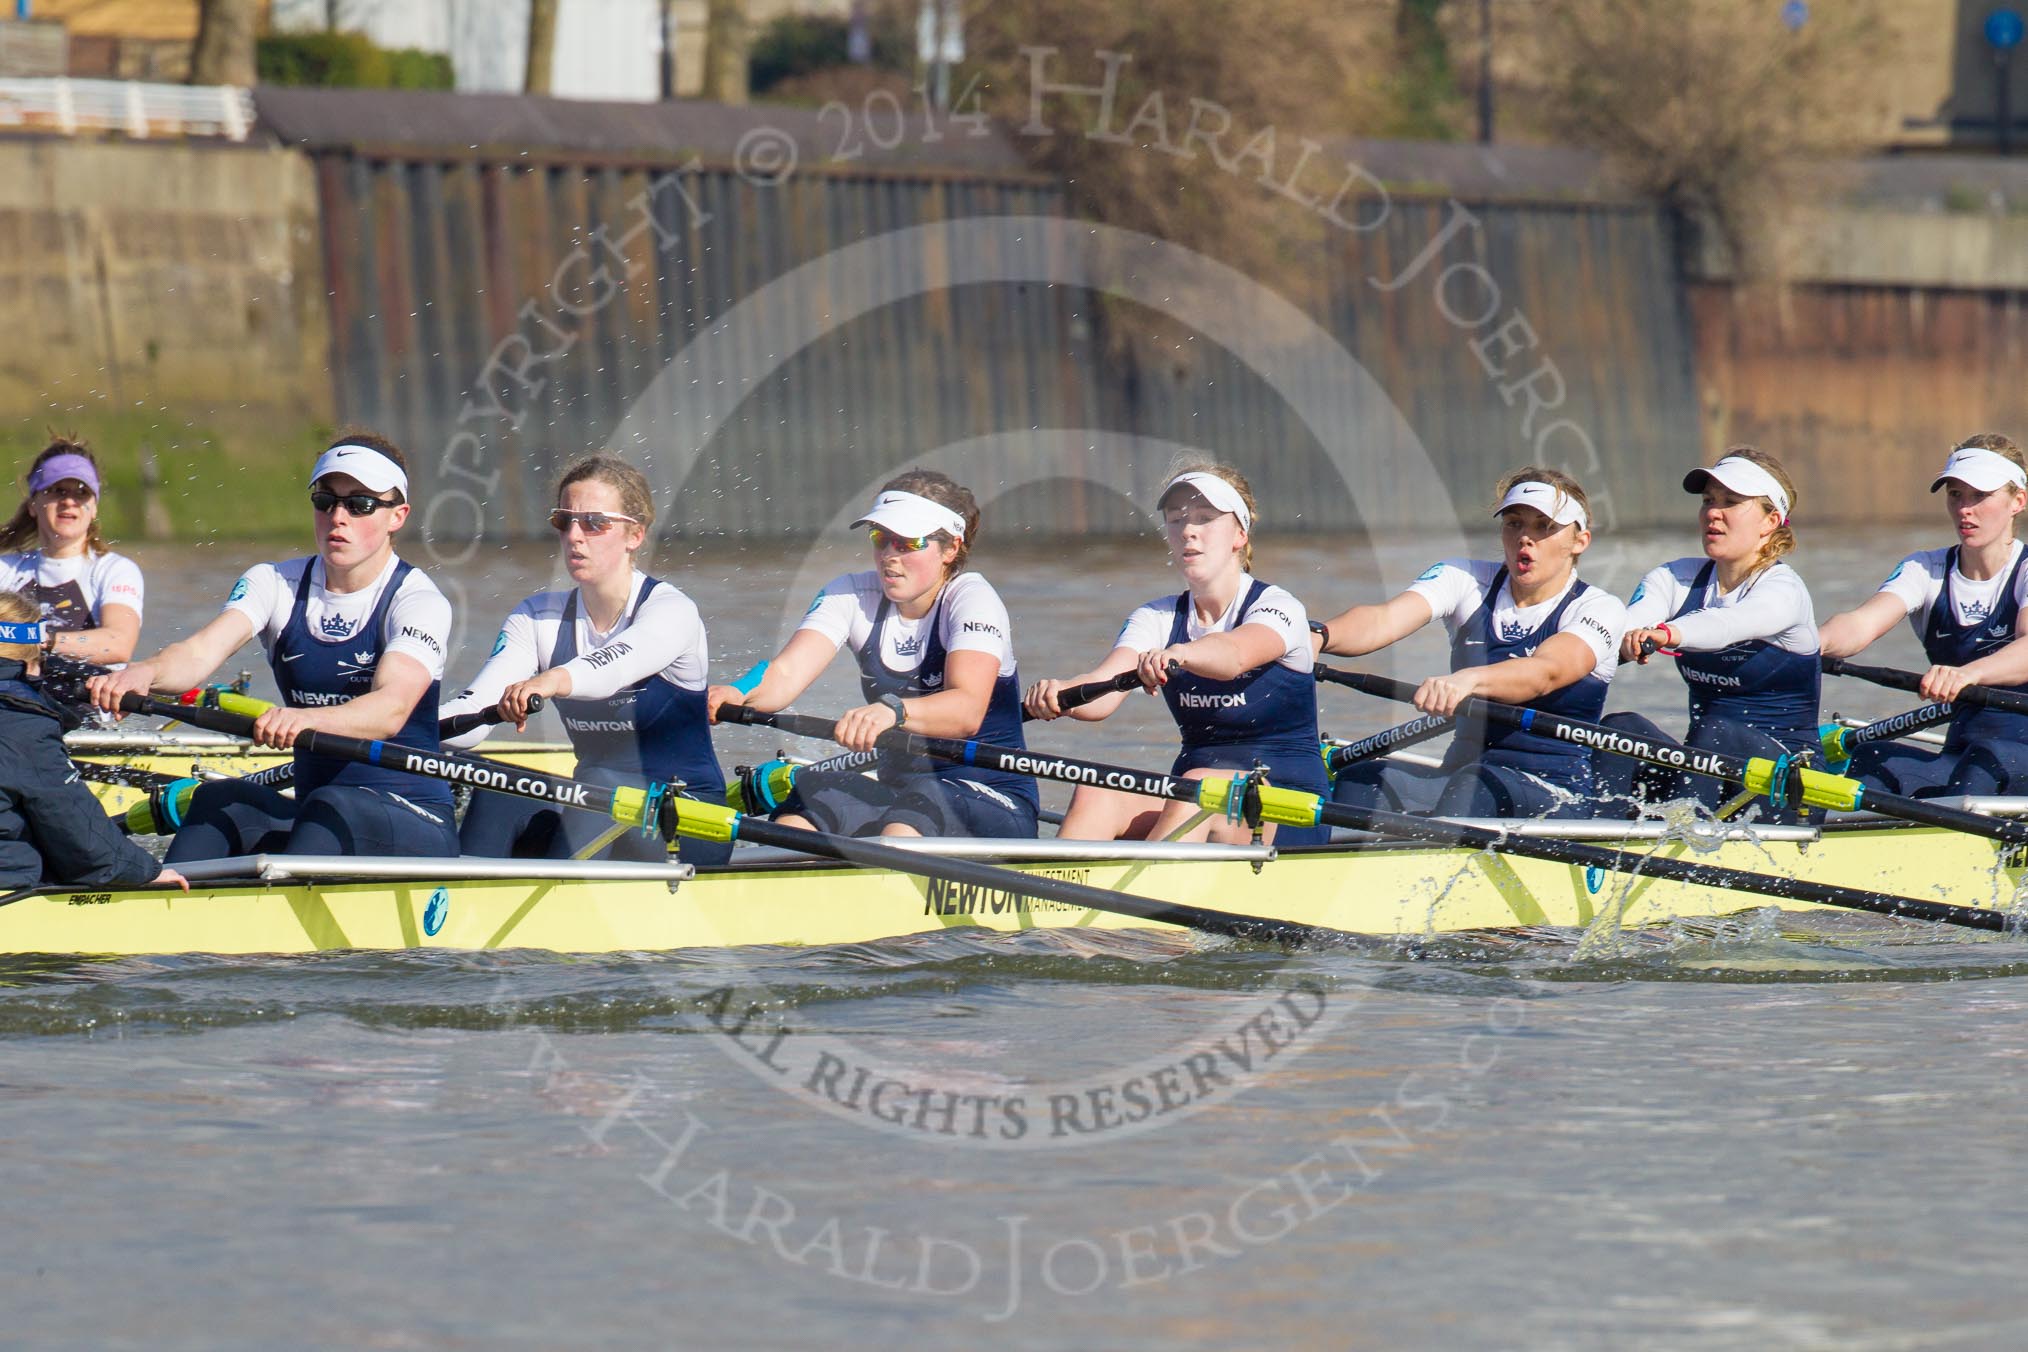 The Boat Race season 2014 - fixture OUWBC vs Molesey BC.




on 01 March 2014 at 13:09, image #180